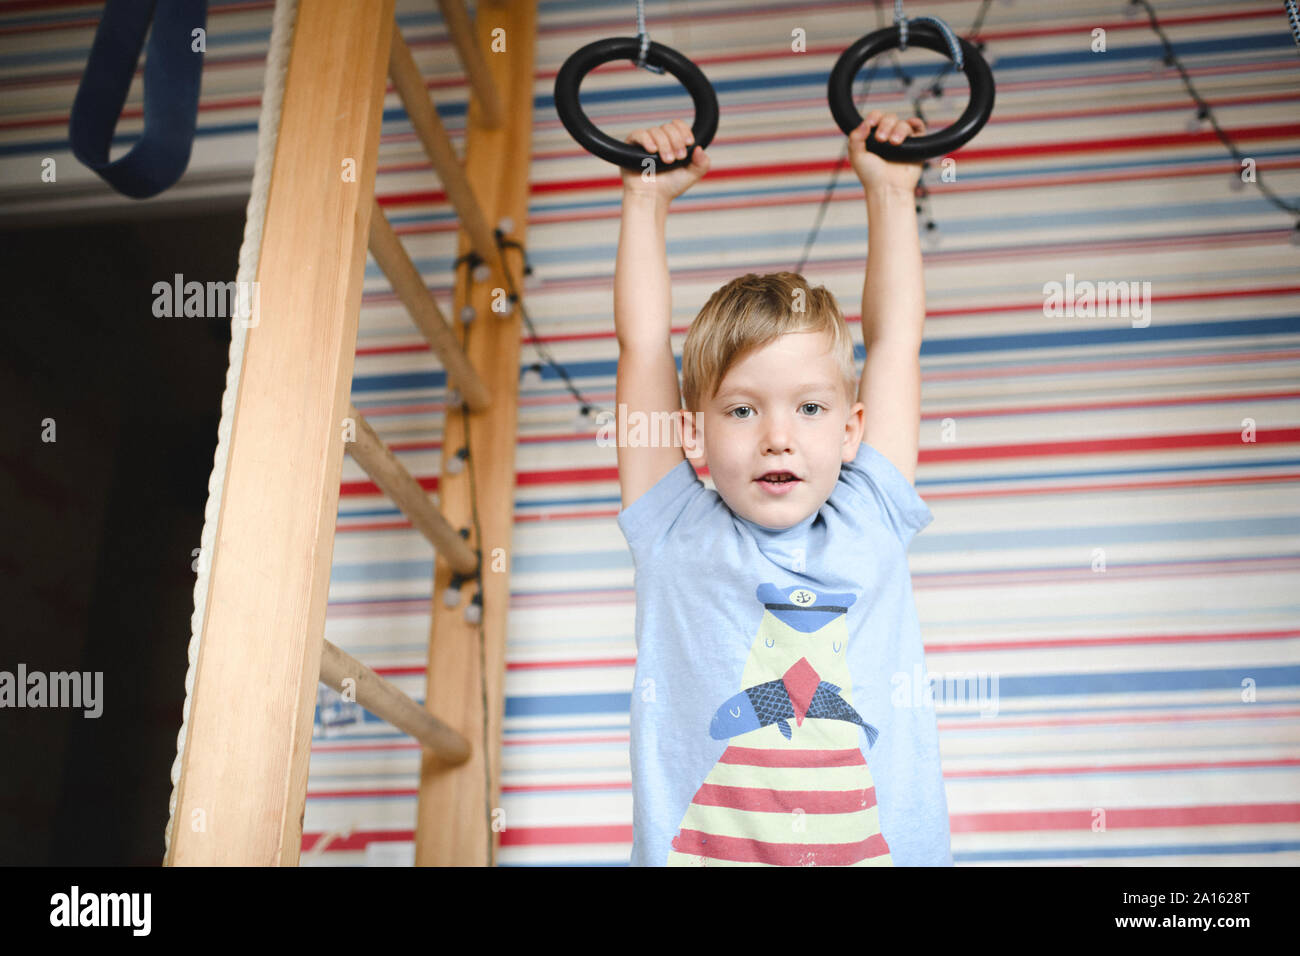 Portrait of a boy hanging at gymnastic rings Stock Photo